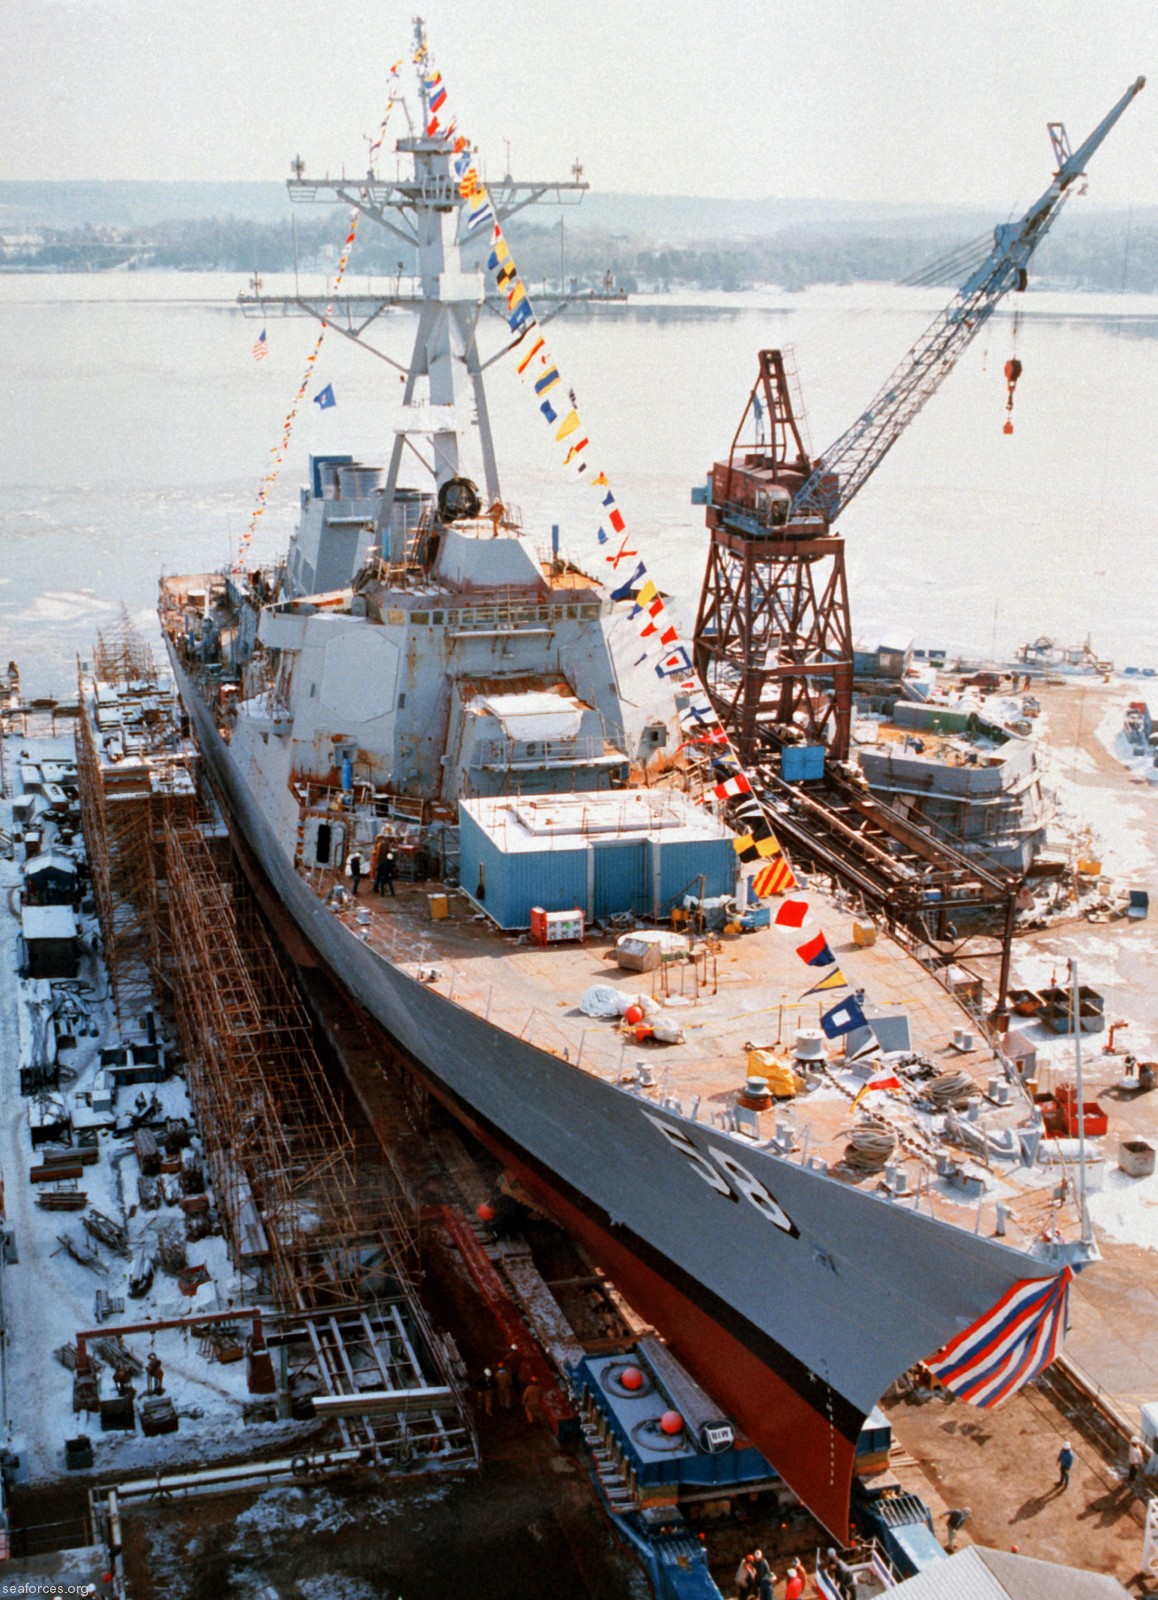 ddg-58 uss laboon guided missile destroyer us navy 76 bath iron works maine